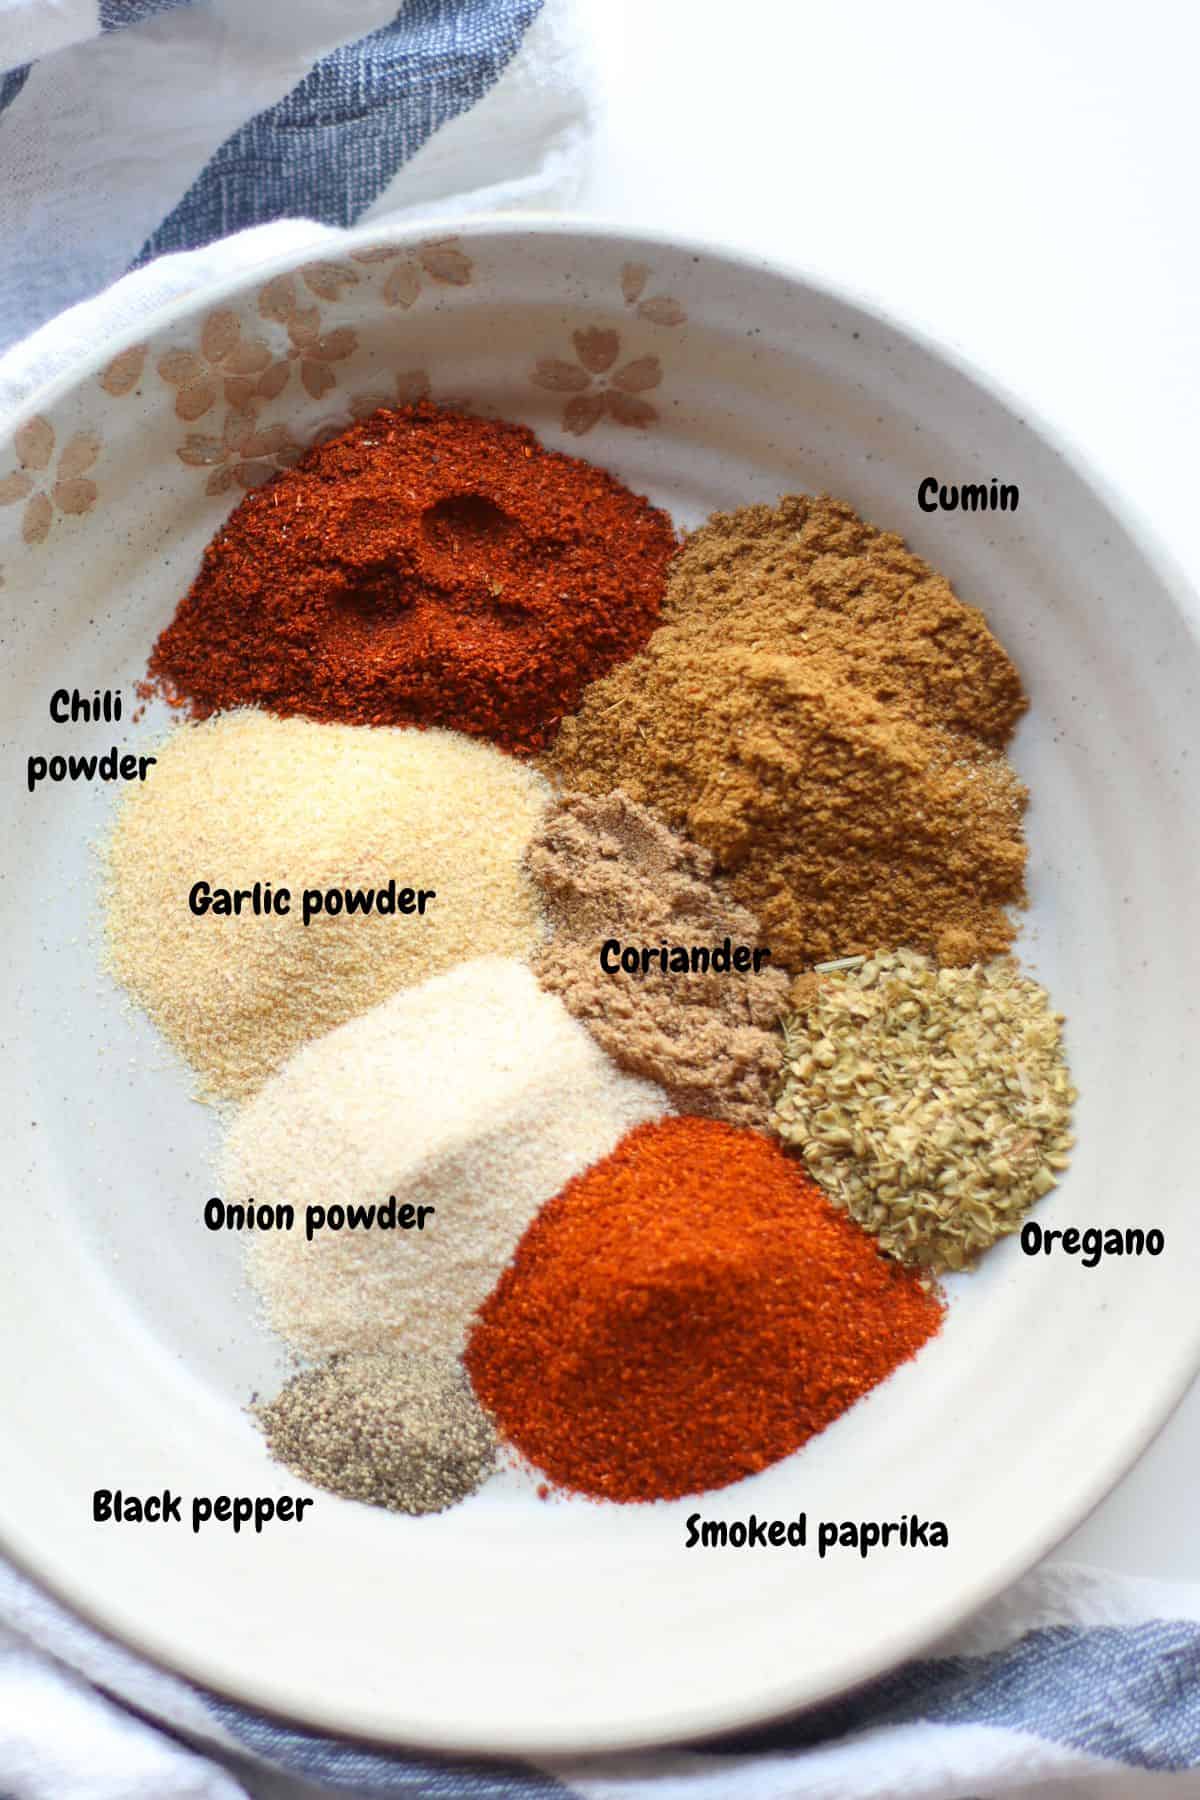 All the spices laid out on a plate and labeled.